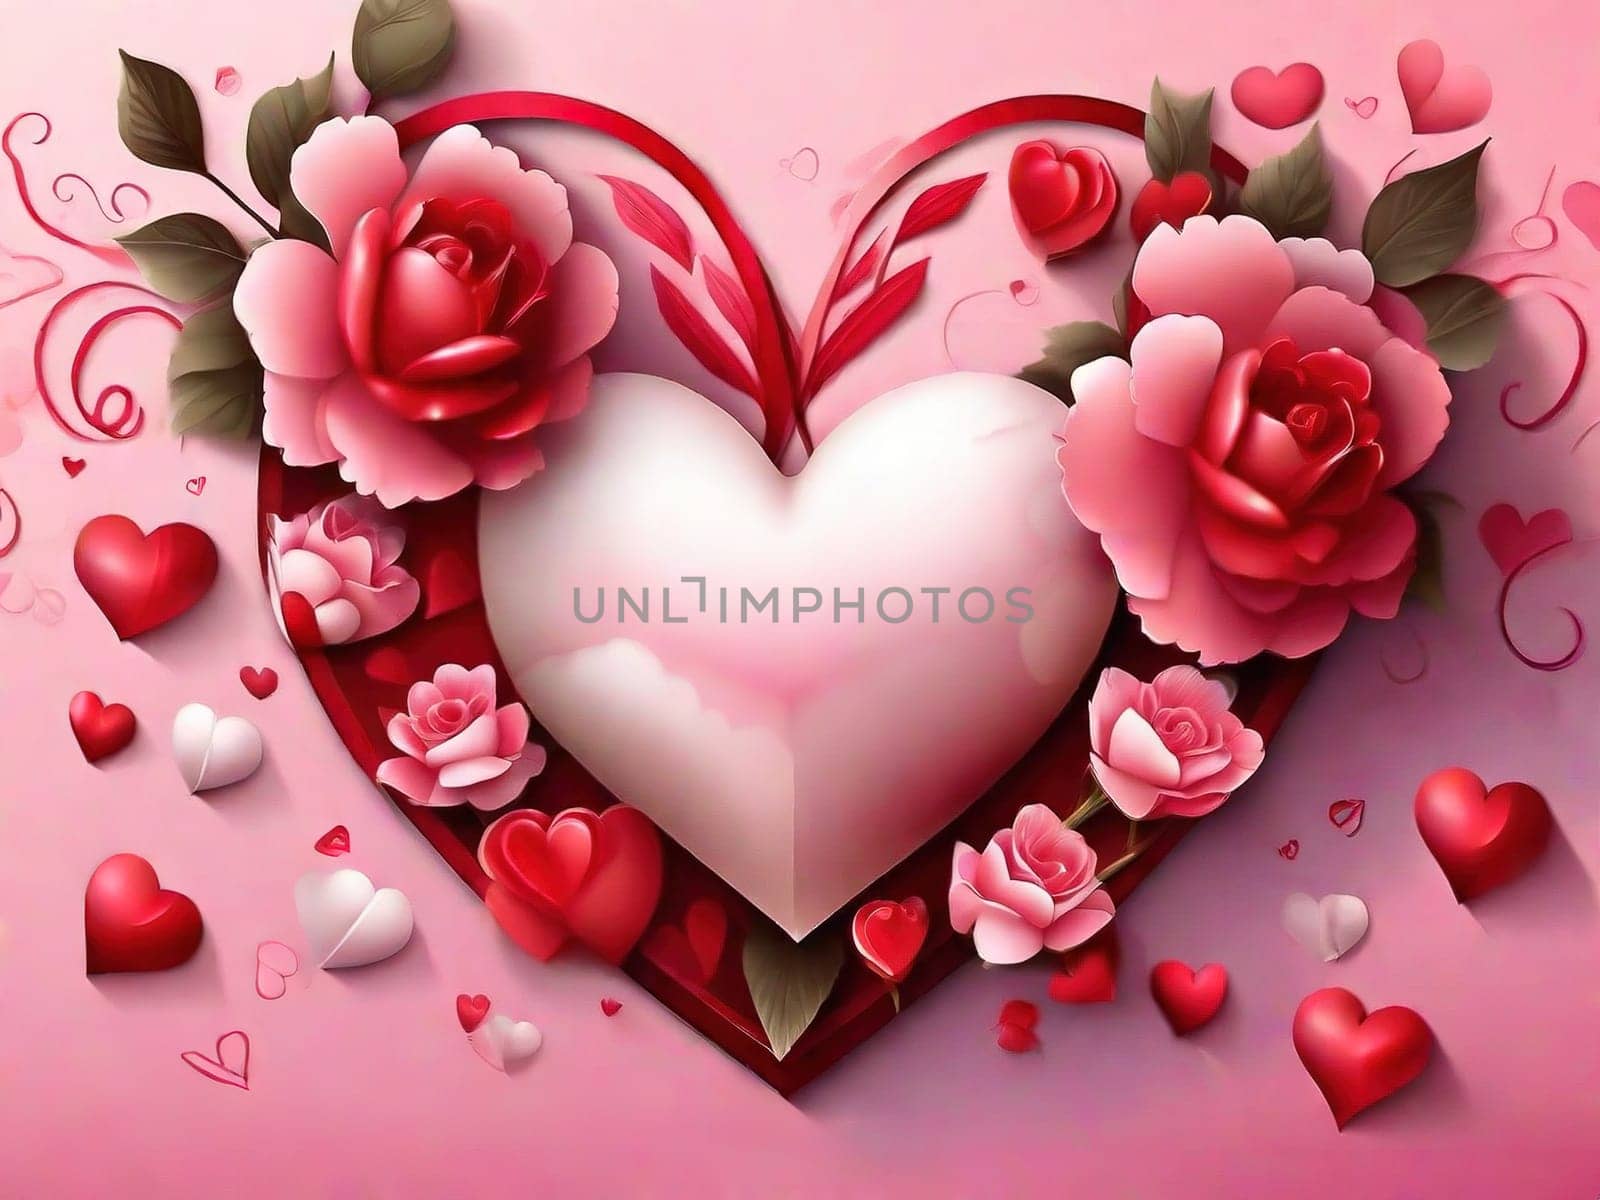 Valentine's Day hearts, painting pink hearts and flowers on a colored background, greeting card